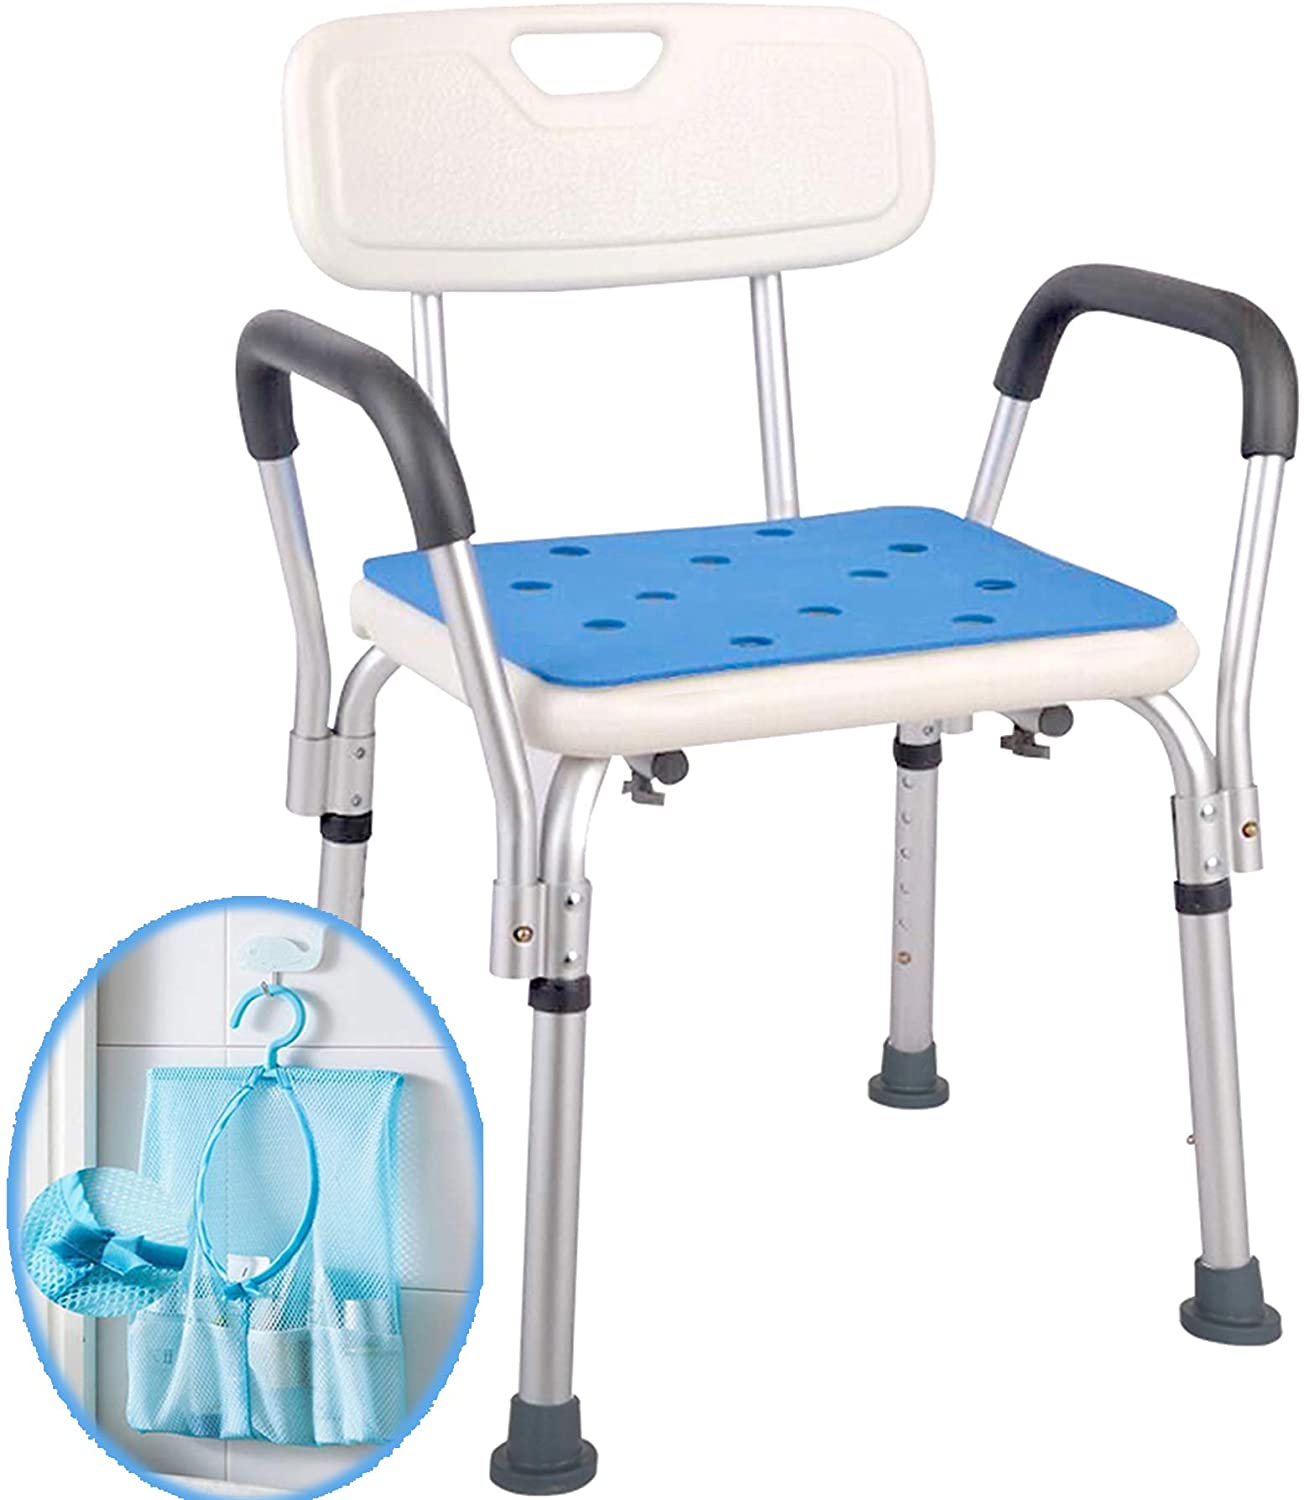 Top 10 Best Shower Benches and Chairs for Elderly, Handicapped, and